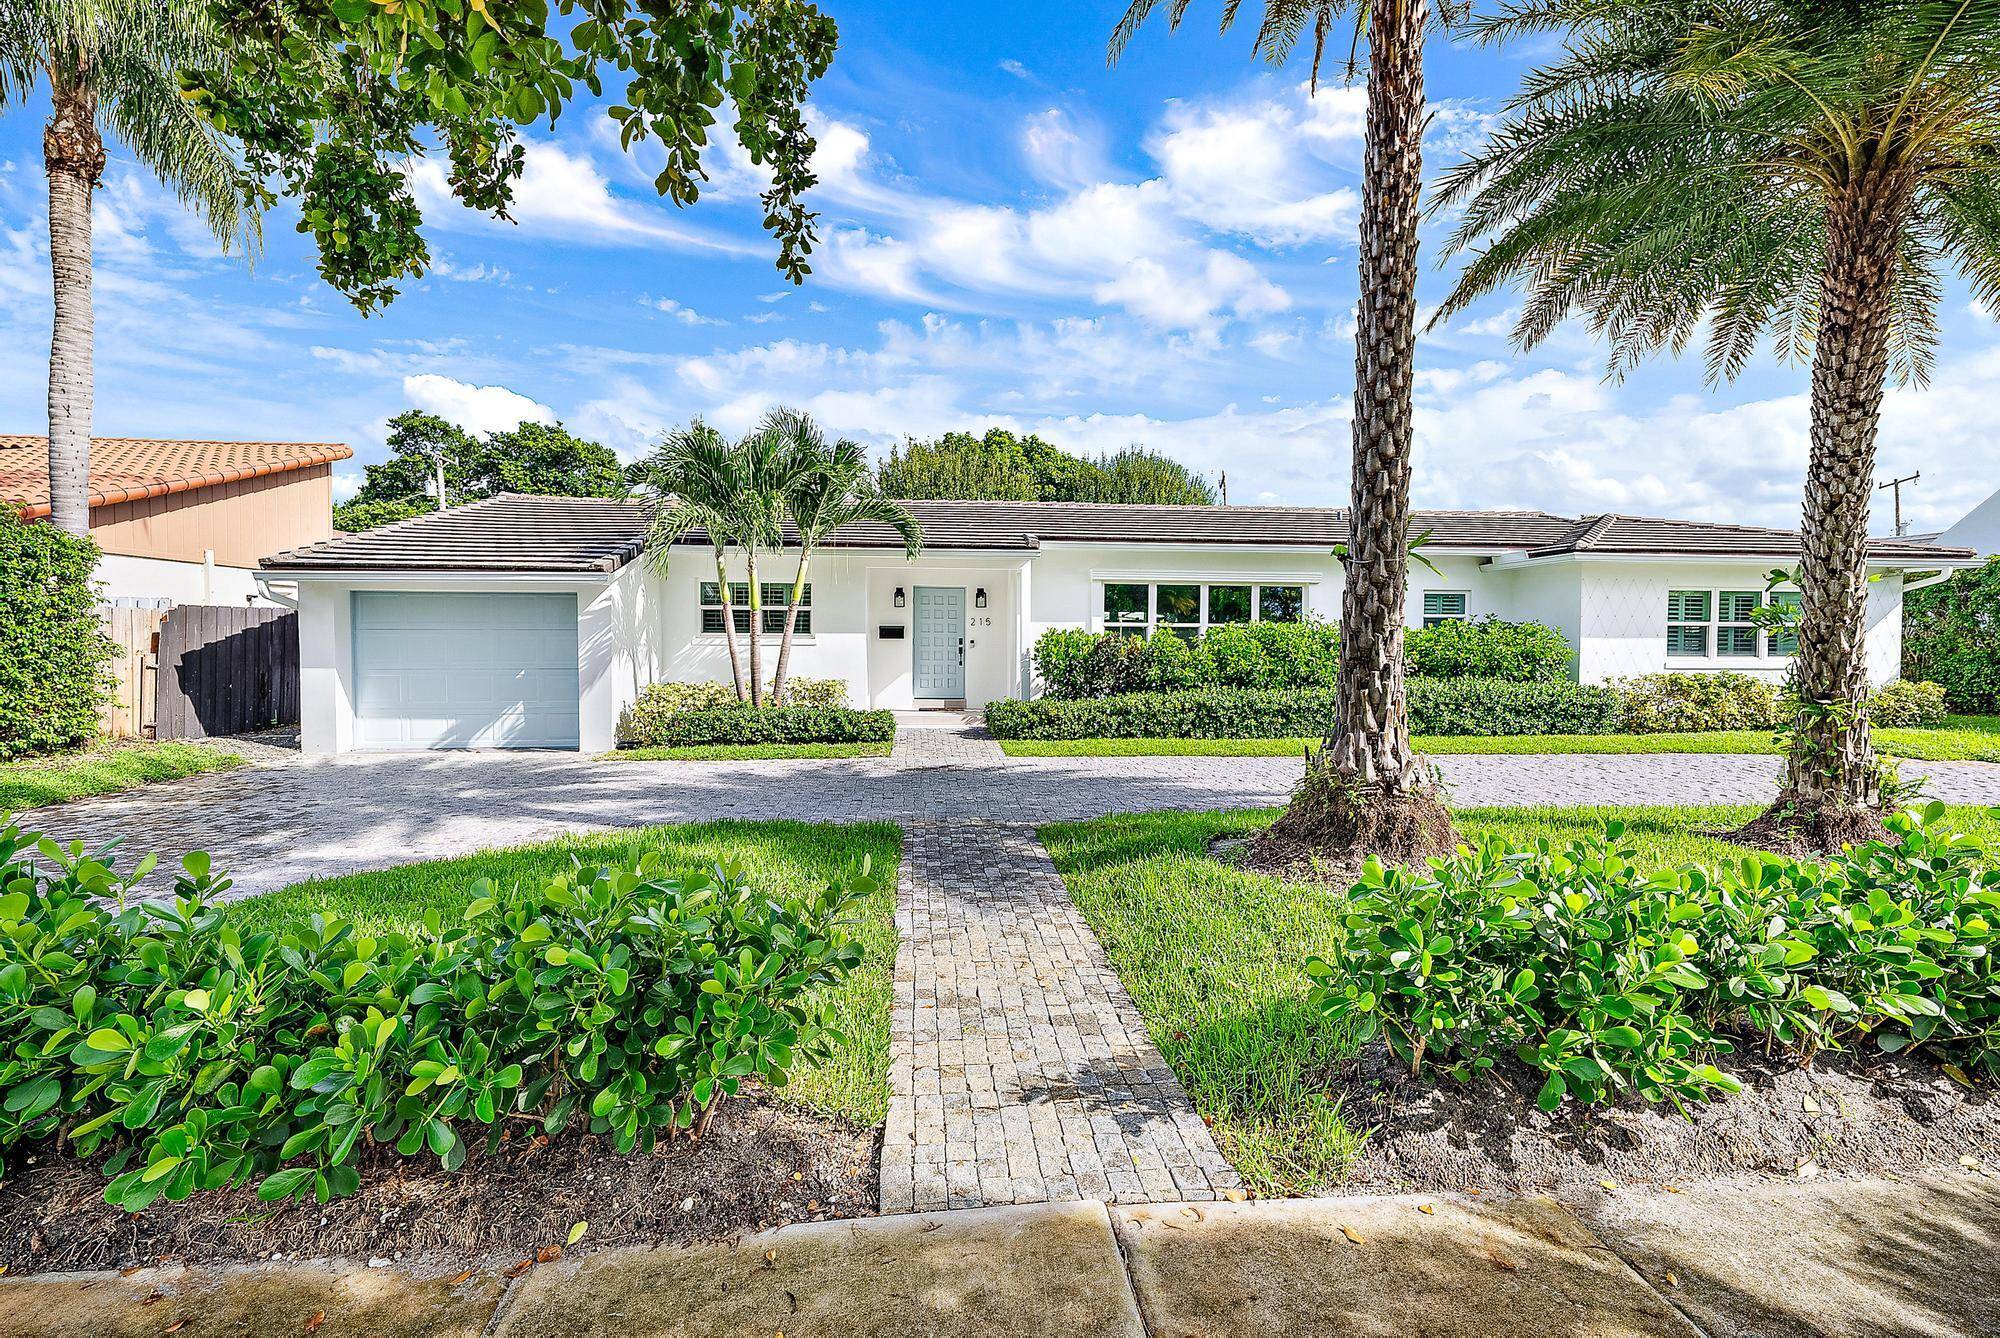 This fully redone, furnished home in the highly desirable SoSo neighborhood embraces Florida living.